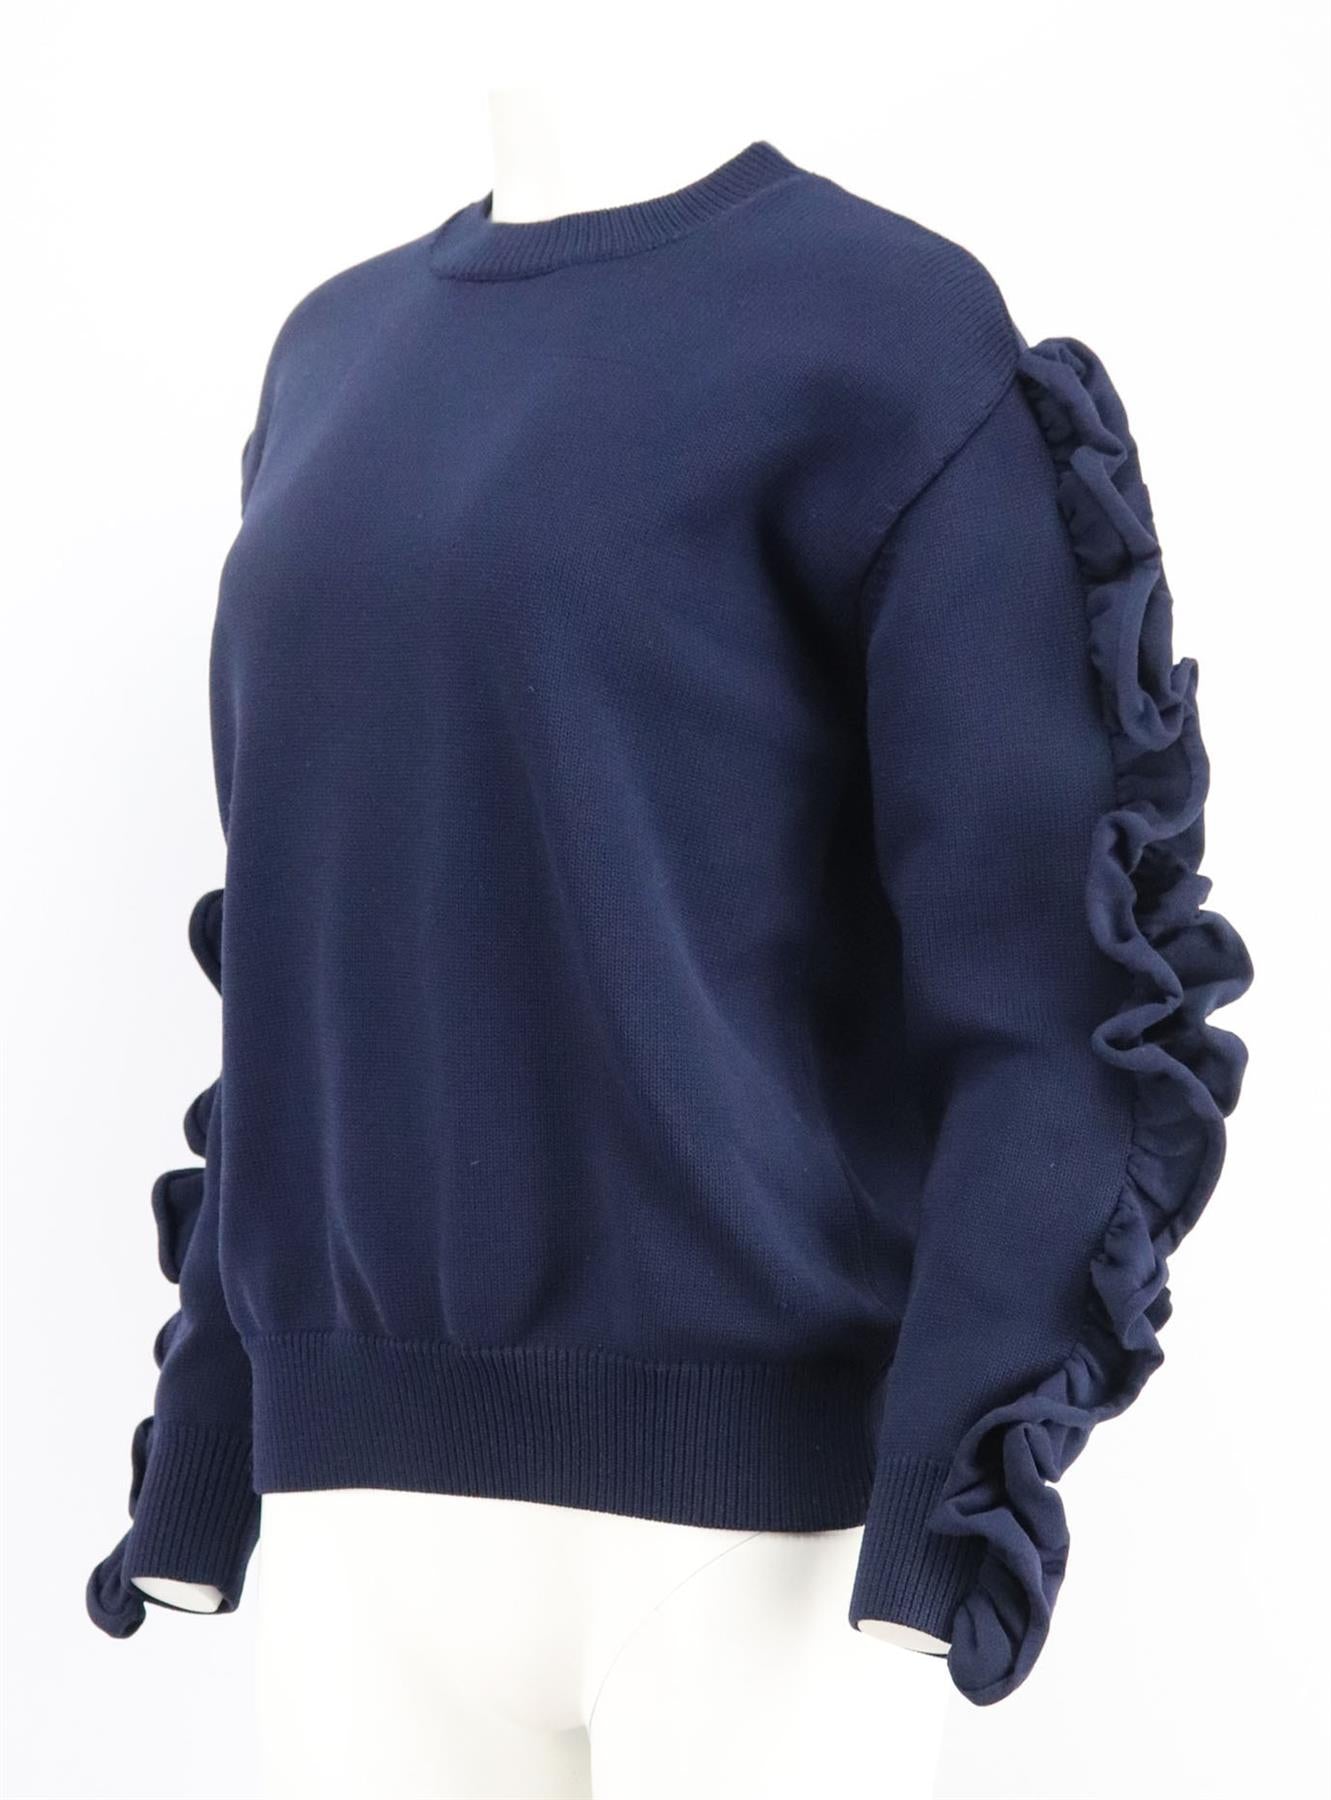 VICTORIA VICTORIA BECKHAM RUFFLE TRIMMED RIBBED KNIT SWEATER SMALL